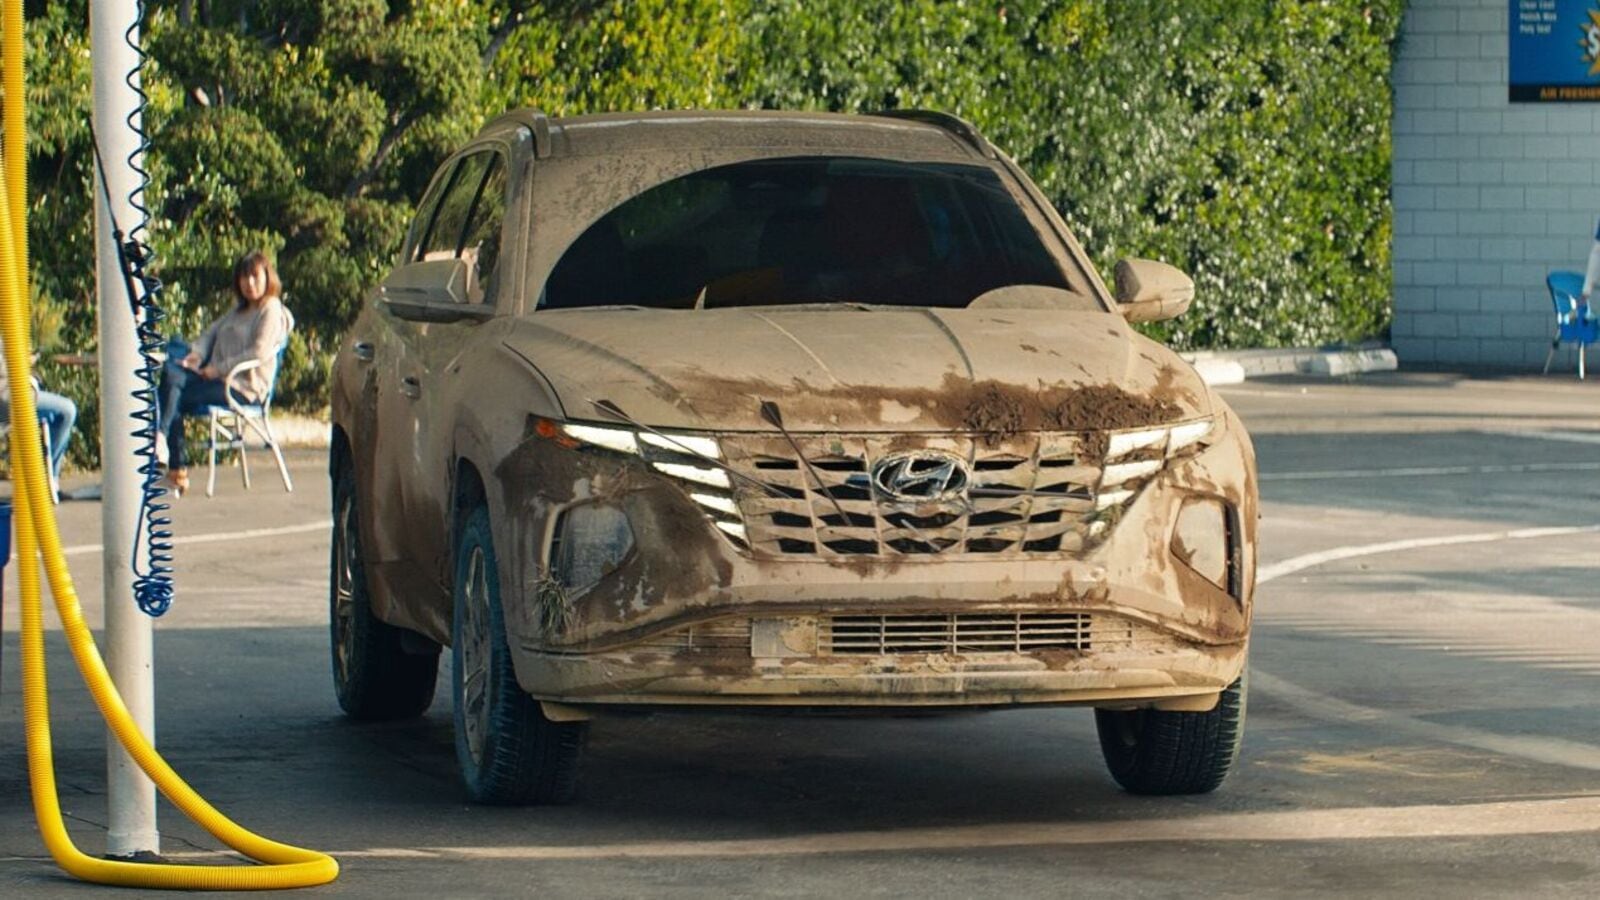 This modified Hyundai Tucson 'Beast' is in the new Uncharted movie